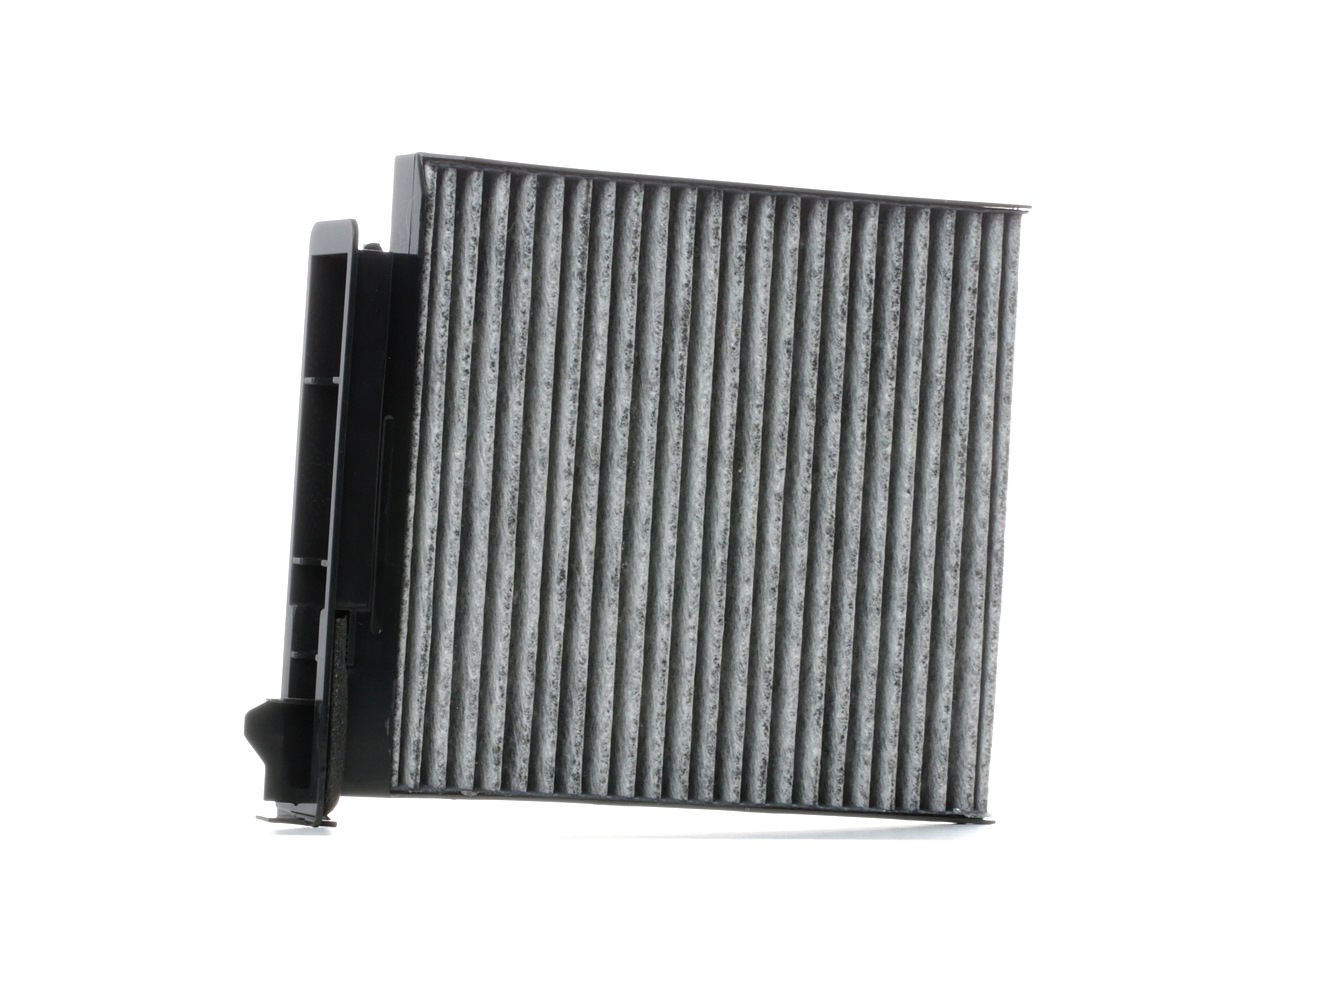 STARK SKIF-0170029 Pollen filter Activated Carbon Filter, 186 mm x 183 mm, Activated Carbon